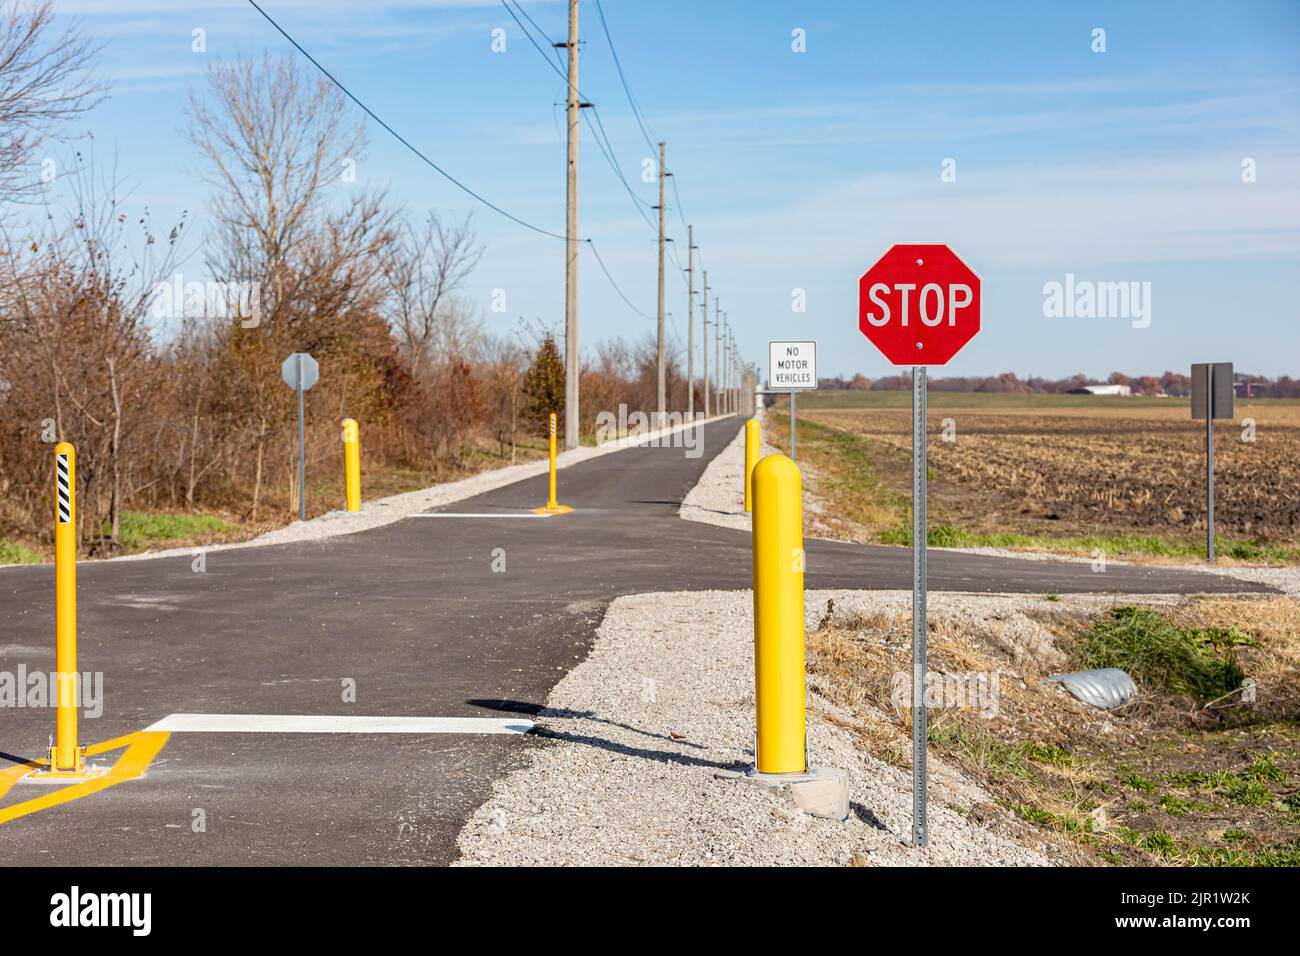 Multipurpose or multiuse bike trail with traffic barriers and stop sign. Rail trail, outdoor recreation and bike path safety concept. Stock Photo